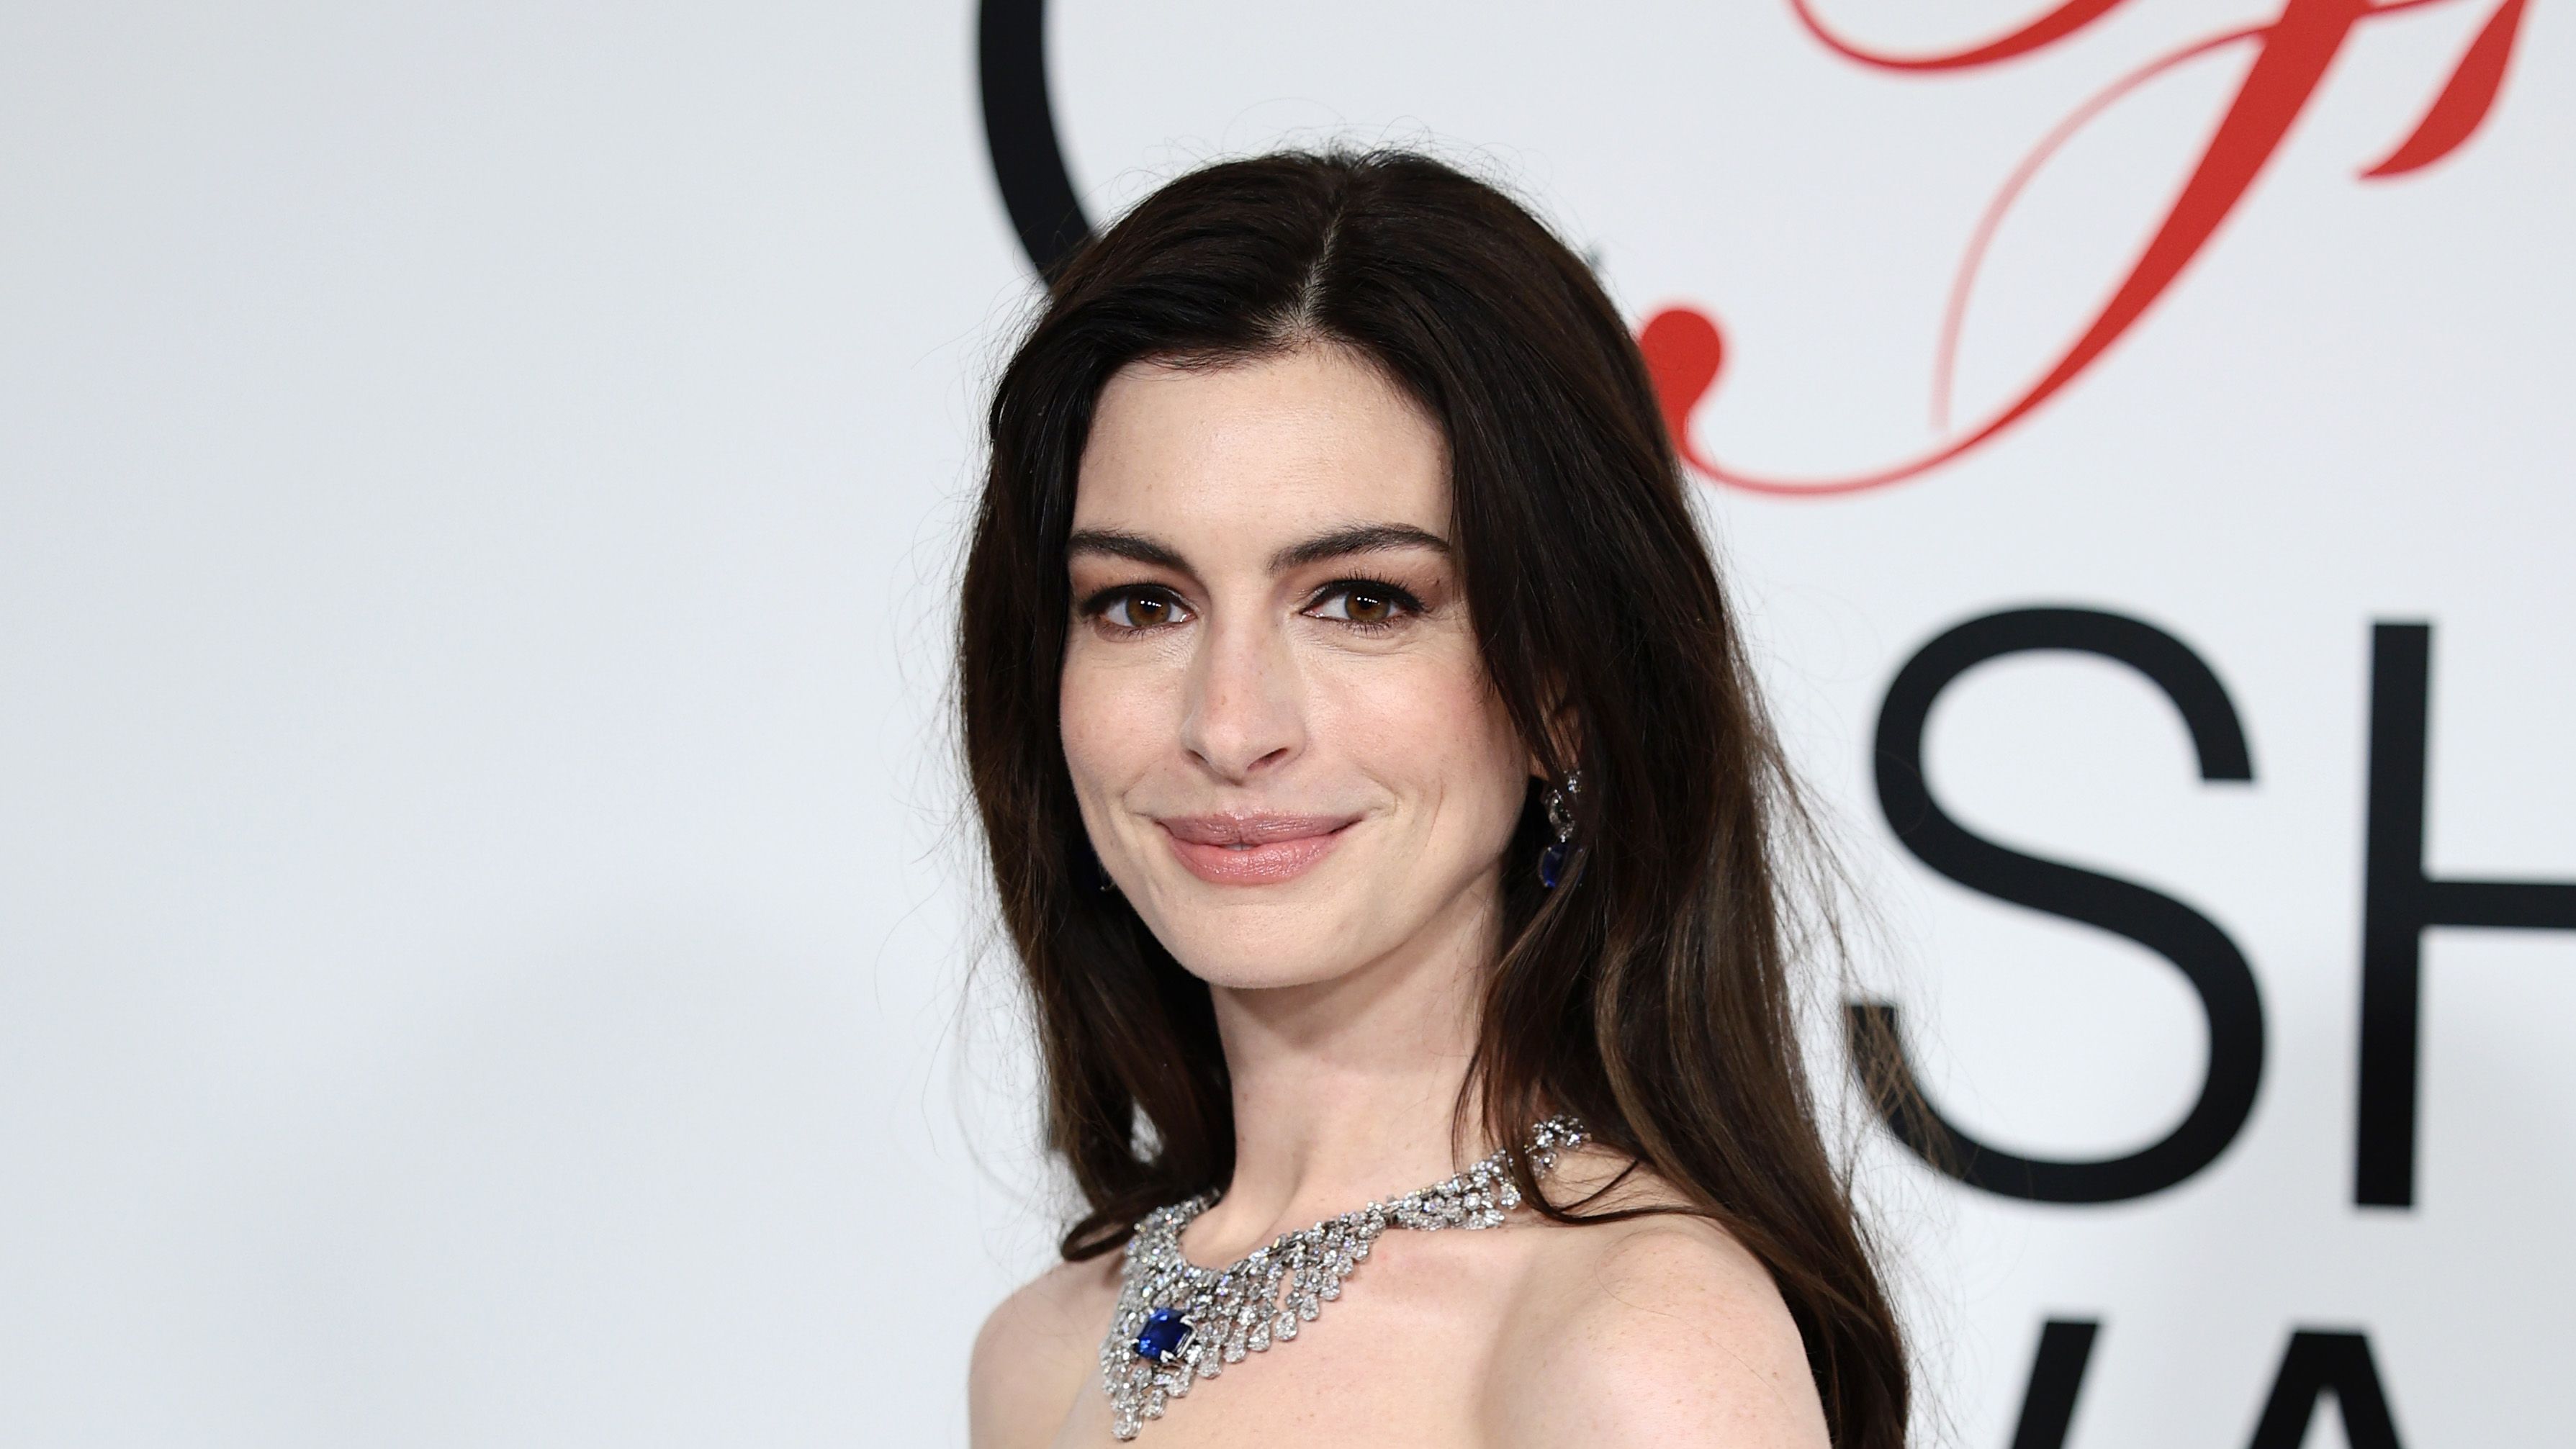 Anne Hathaway wears denim corset and maxi skrit for CFDA Awards